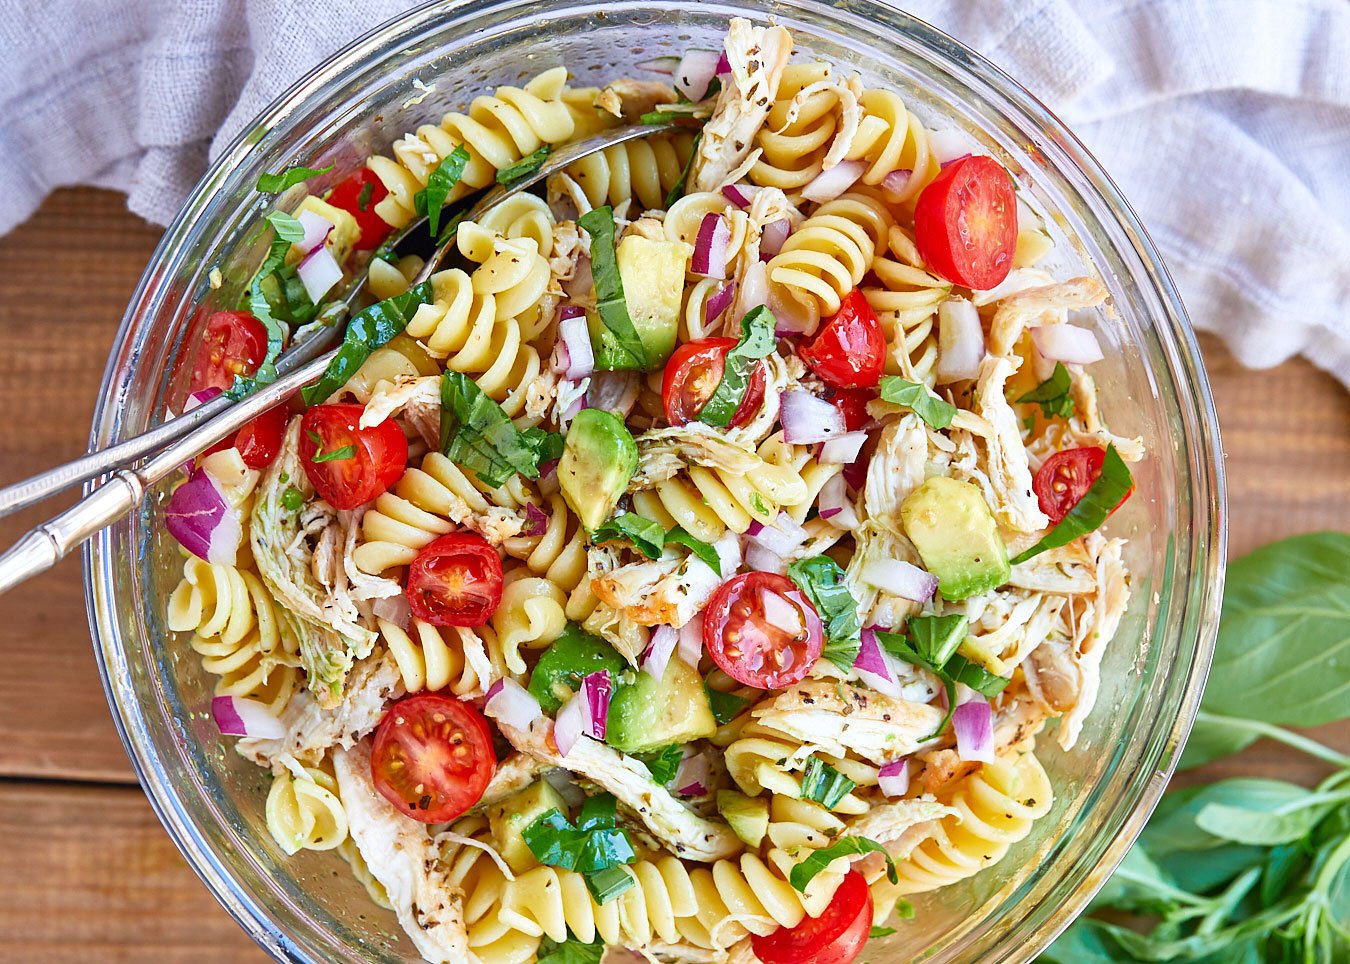 Healthy Chicken Pasta Salad with Avocado, Tomato, and Basil ﻿